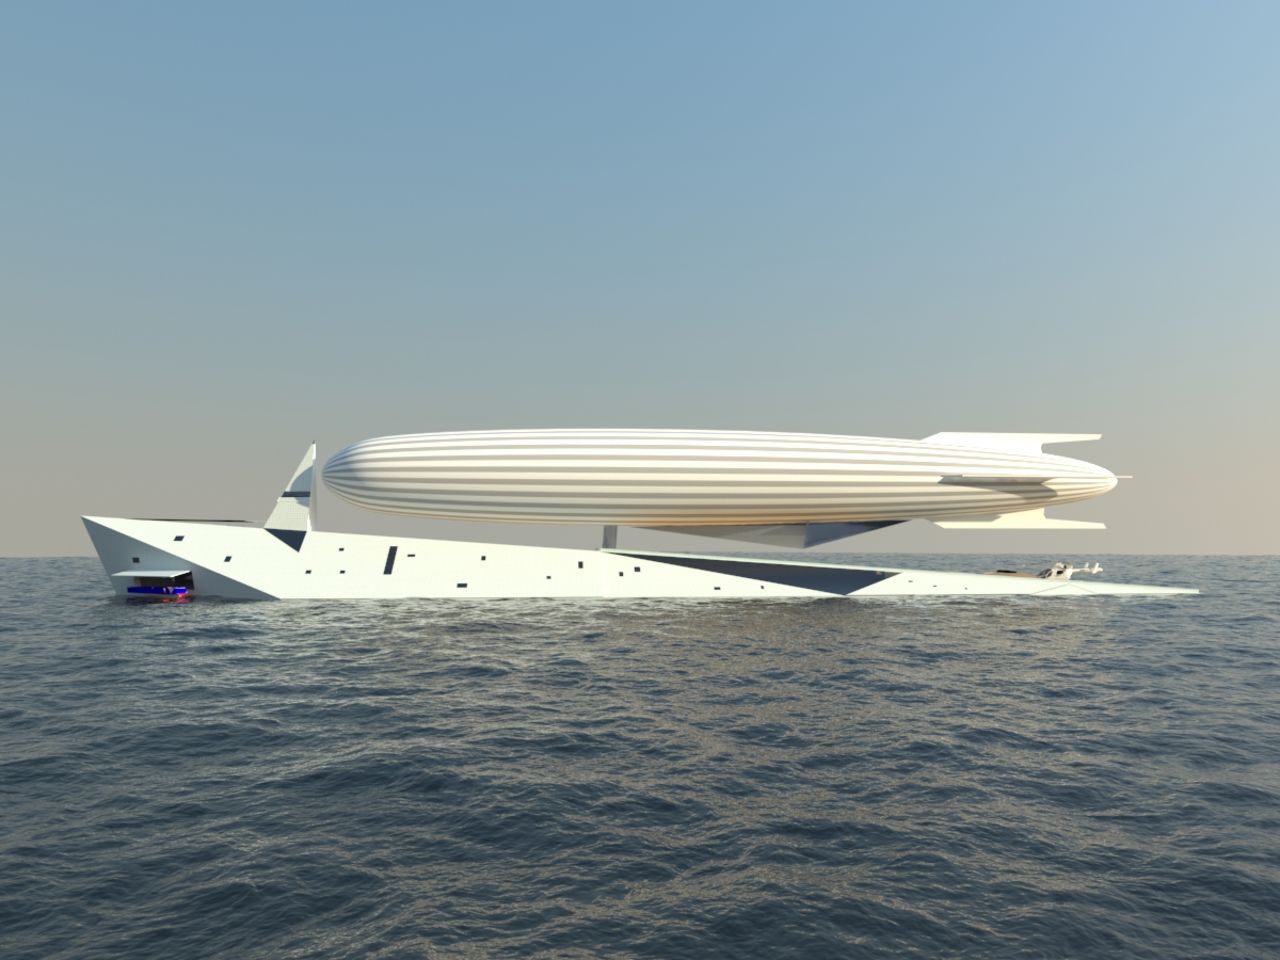 At 140 meters in length, Dare to Dream has the space to host at least 12 guests, though there will also be entertaining and living spaces on board the airship.